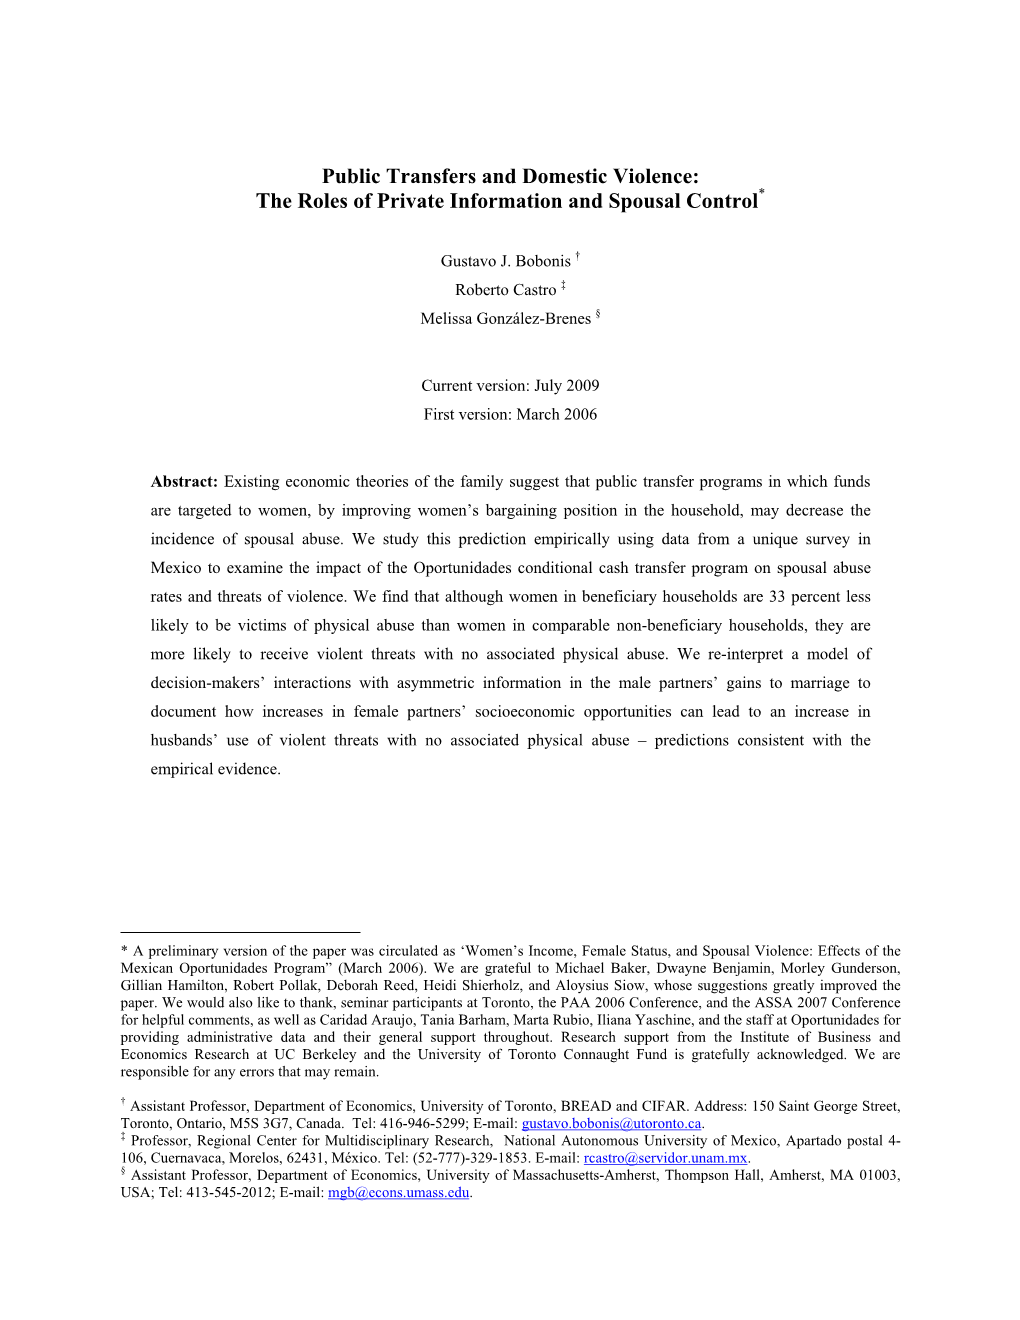 Public Transfers and Domestic Violence: the Roles of Private Information and Spousal Control*